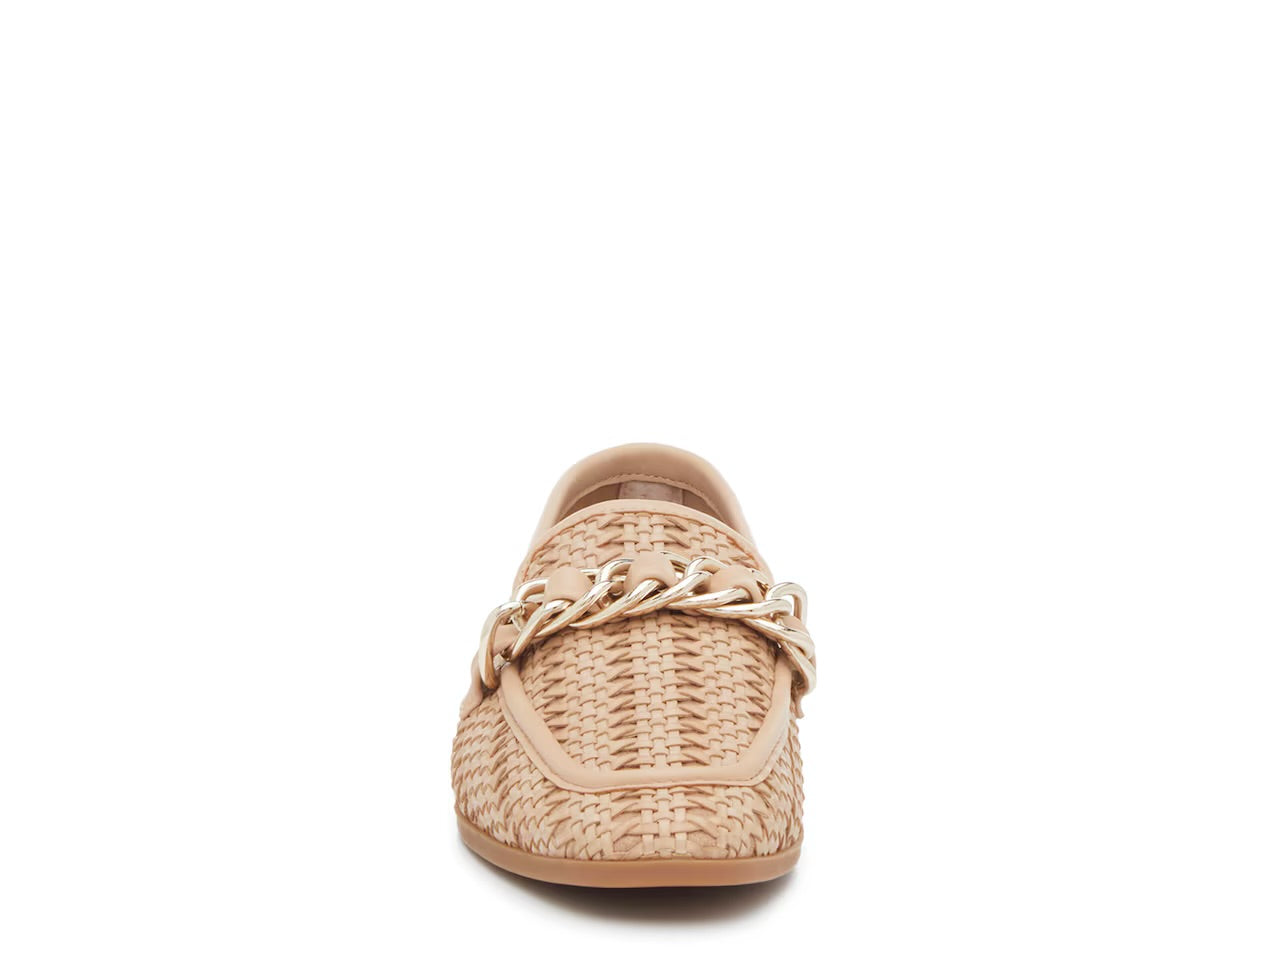 STEVE MADDEN WOVEN DESIGN LOAFERS IN NATURAL TAN